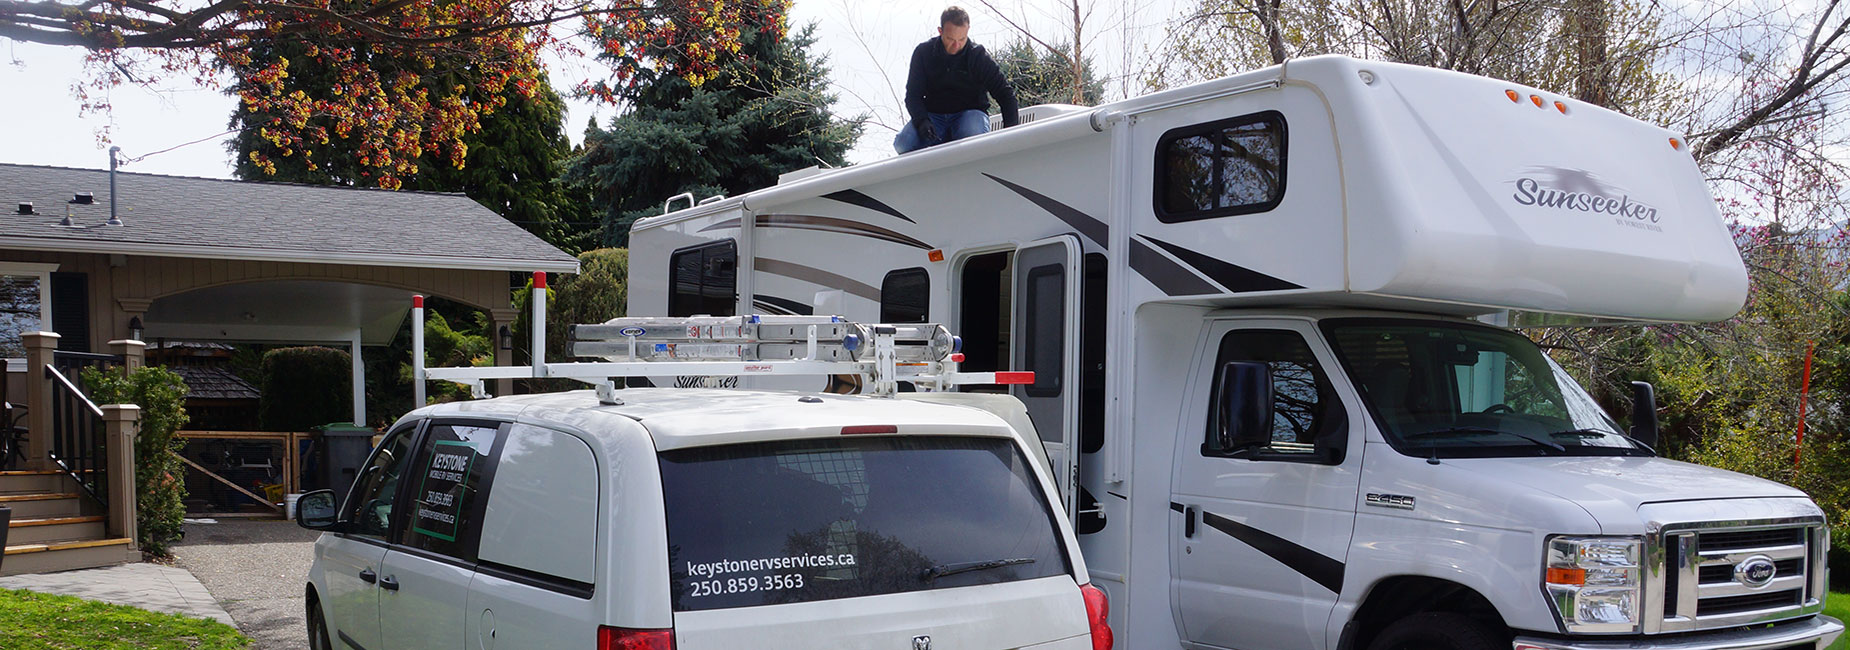 Keystone RV Services in Kelowna will look after all your RV inspection or repair needs.